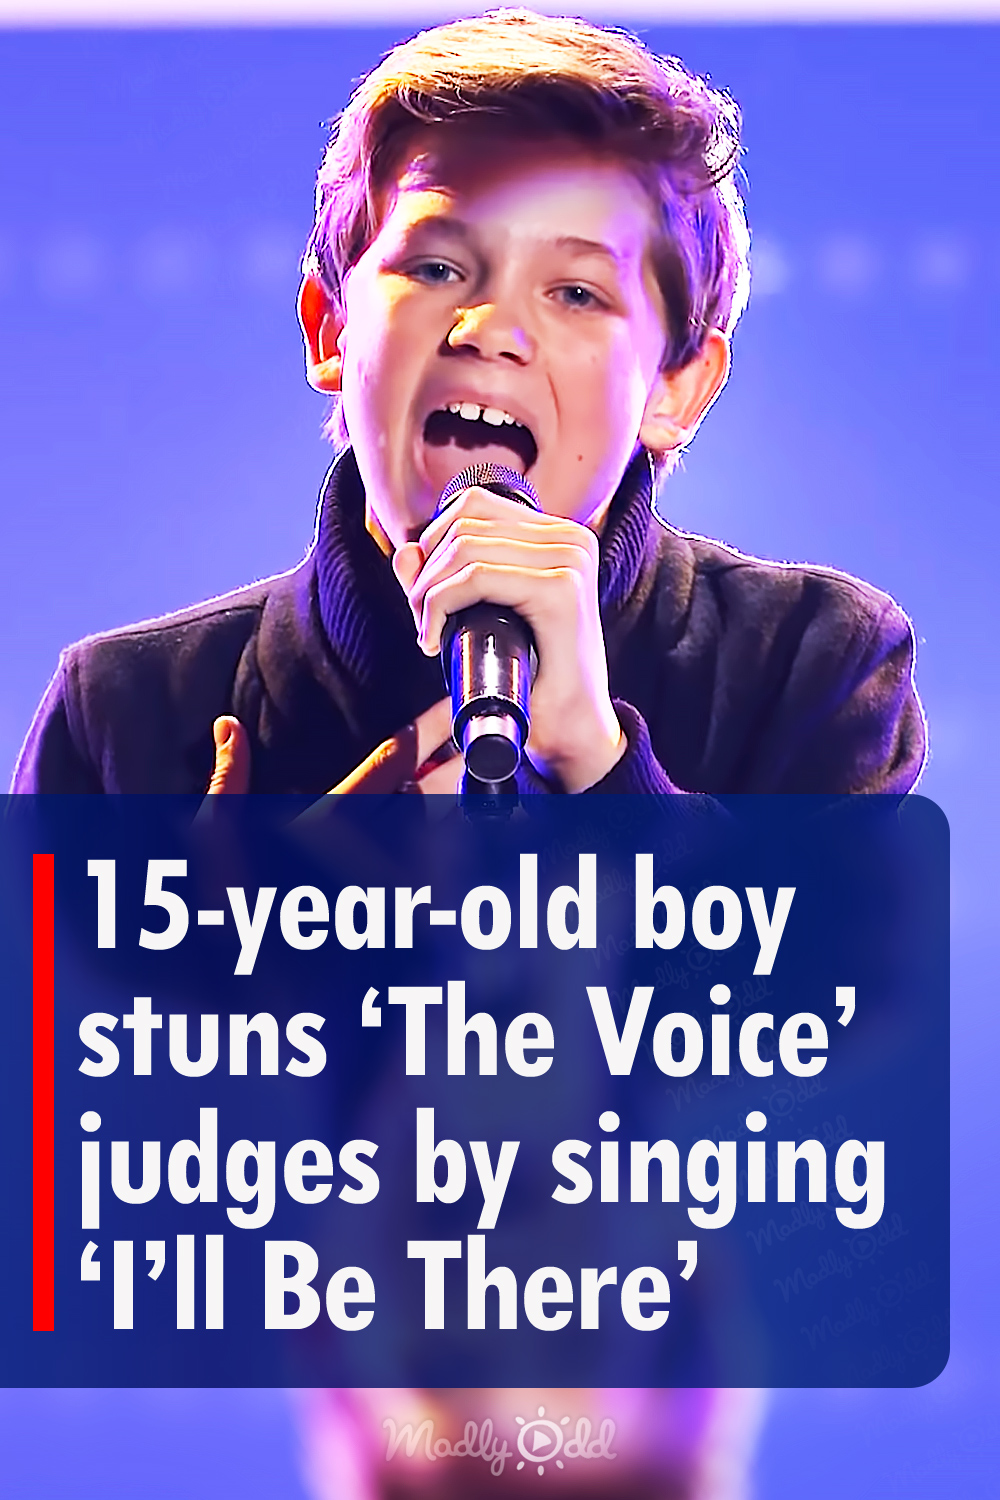 15-year-old boy stuns ‘The Voice’ judges by singing ‘I’ll Be There’